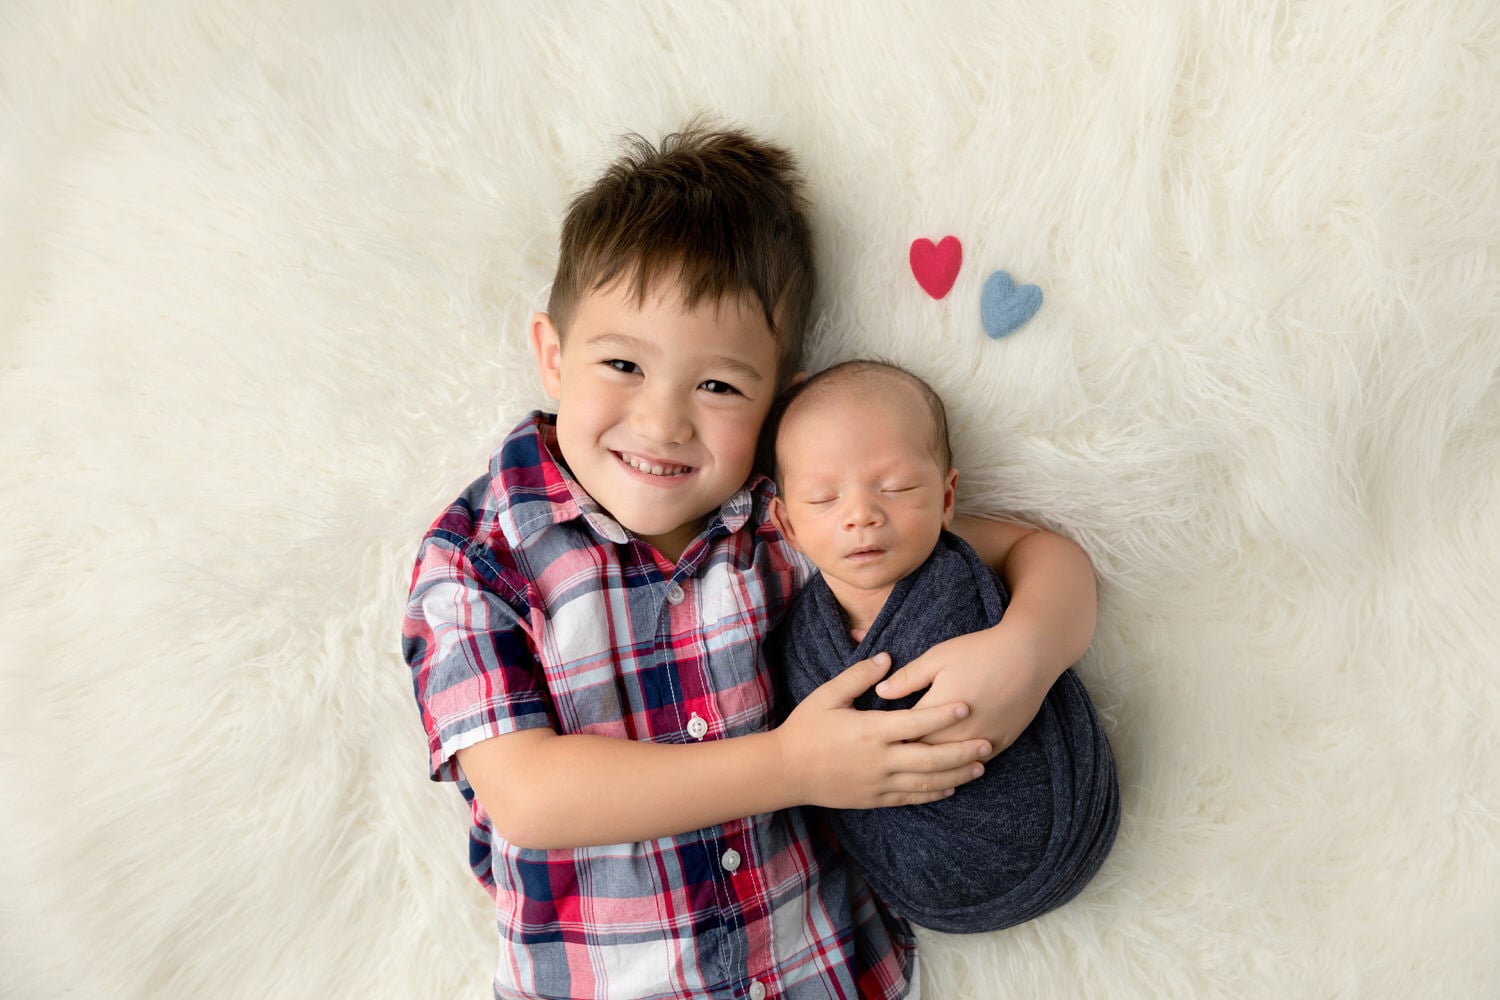 A toddler boy snuggles with his newborn baby brother on a cream colored rug with 2 hearts